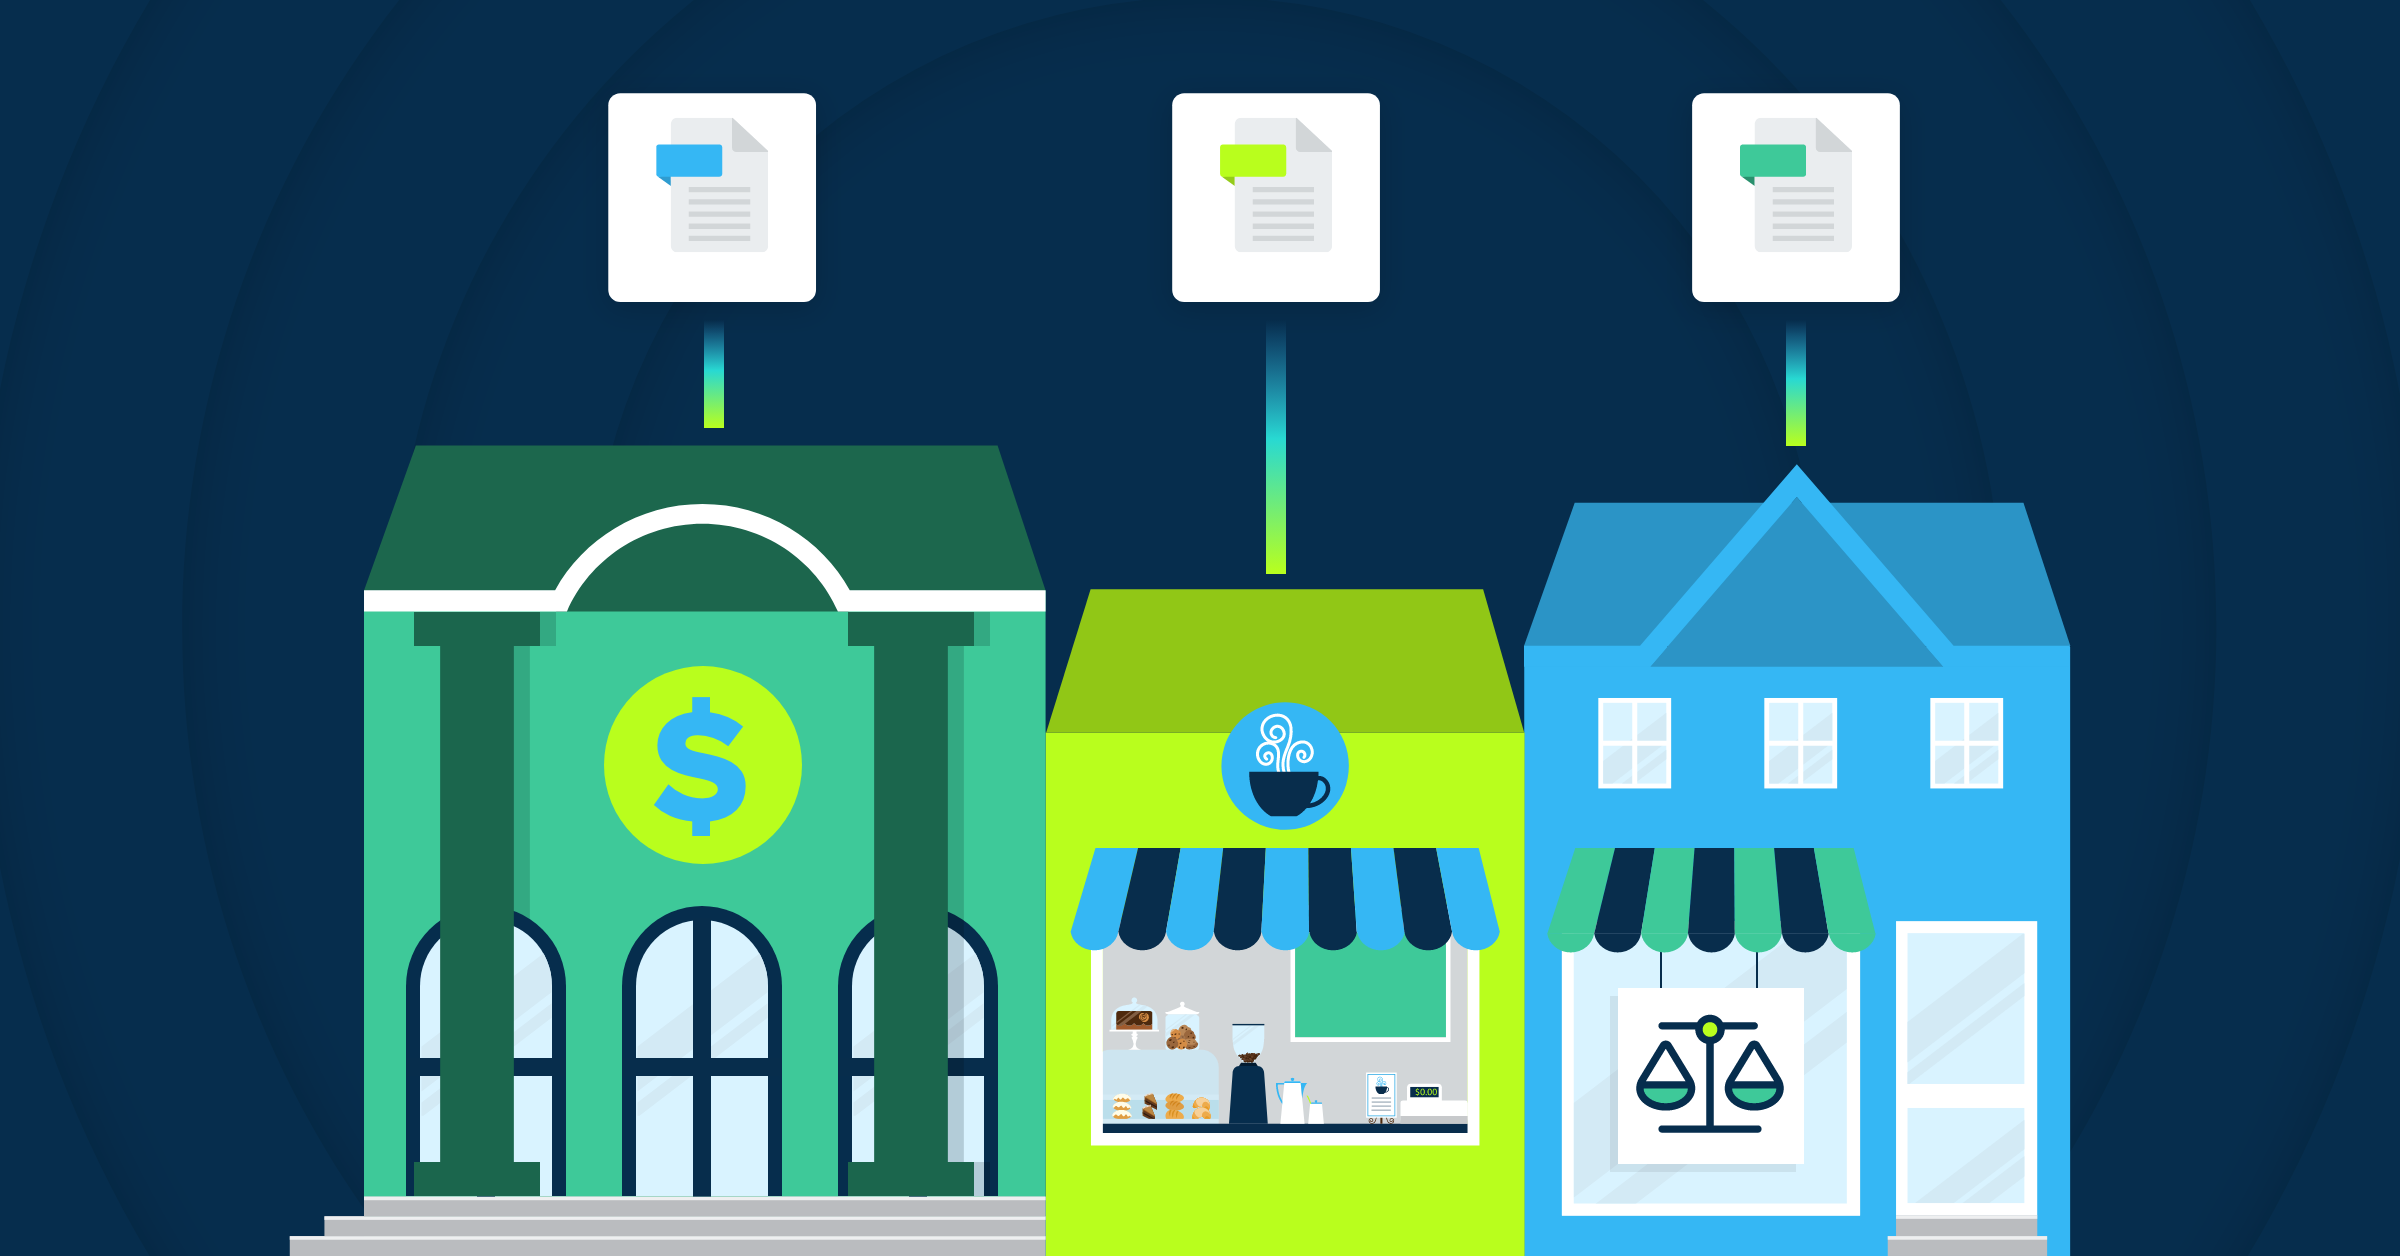 Stylized buildings representing a bank, cafe, and law firm, each with a document icon above, symbolizing different types of online business backup solutions.